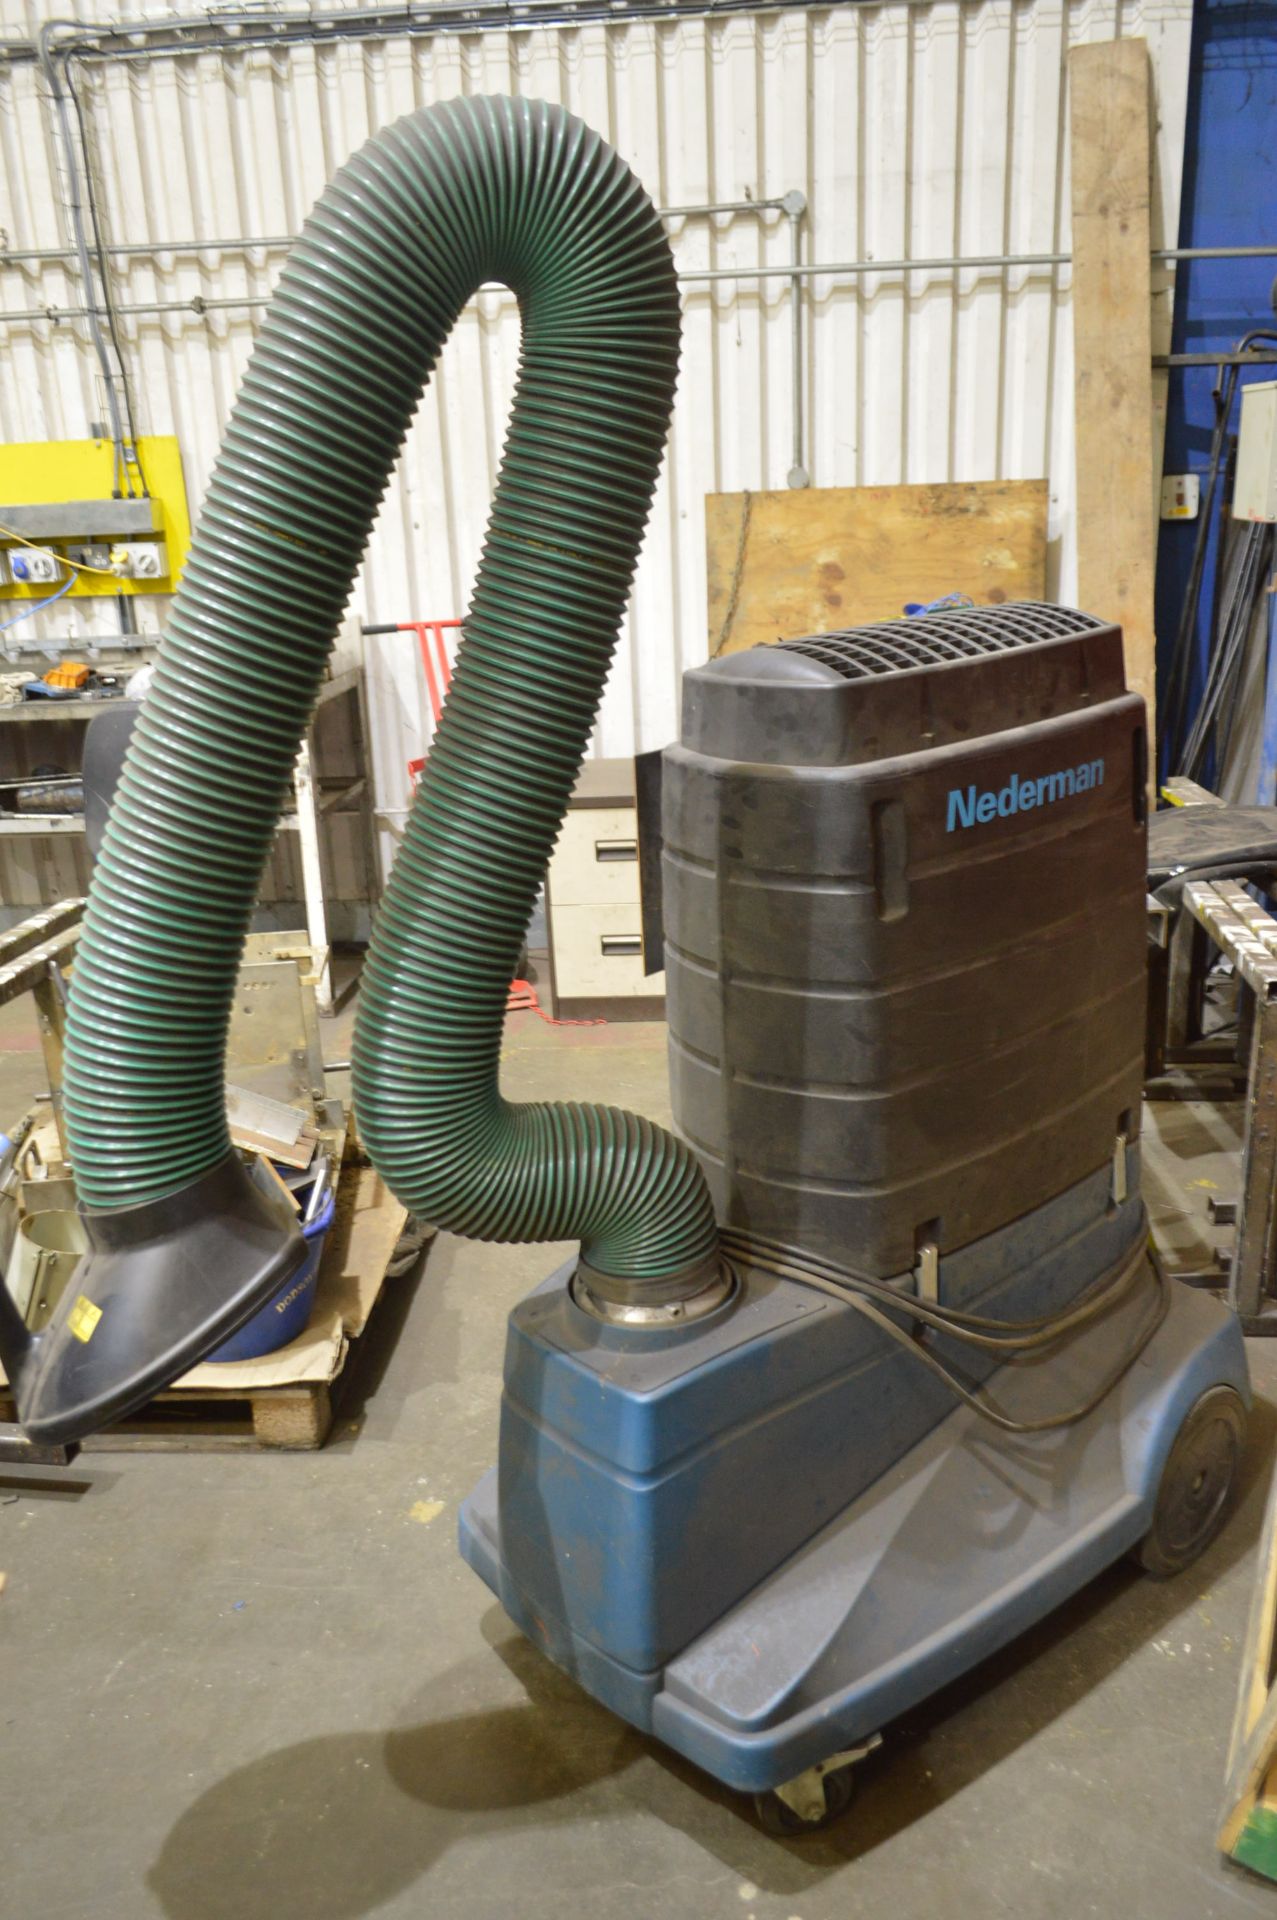 Nederman 13225-00 Mobile Fume Extraction Unit, serial no. 12624745 - Image 2 of 4